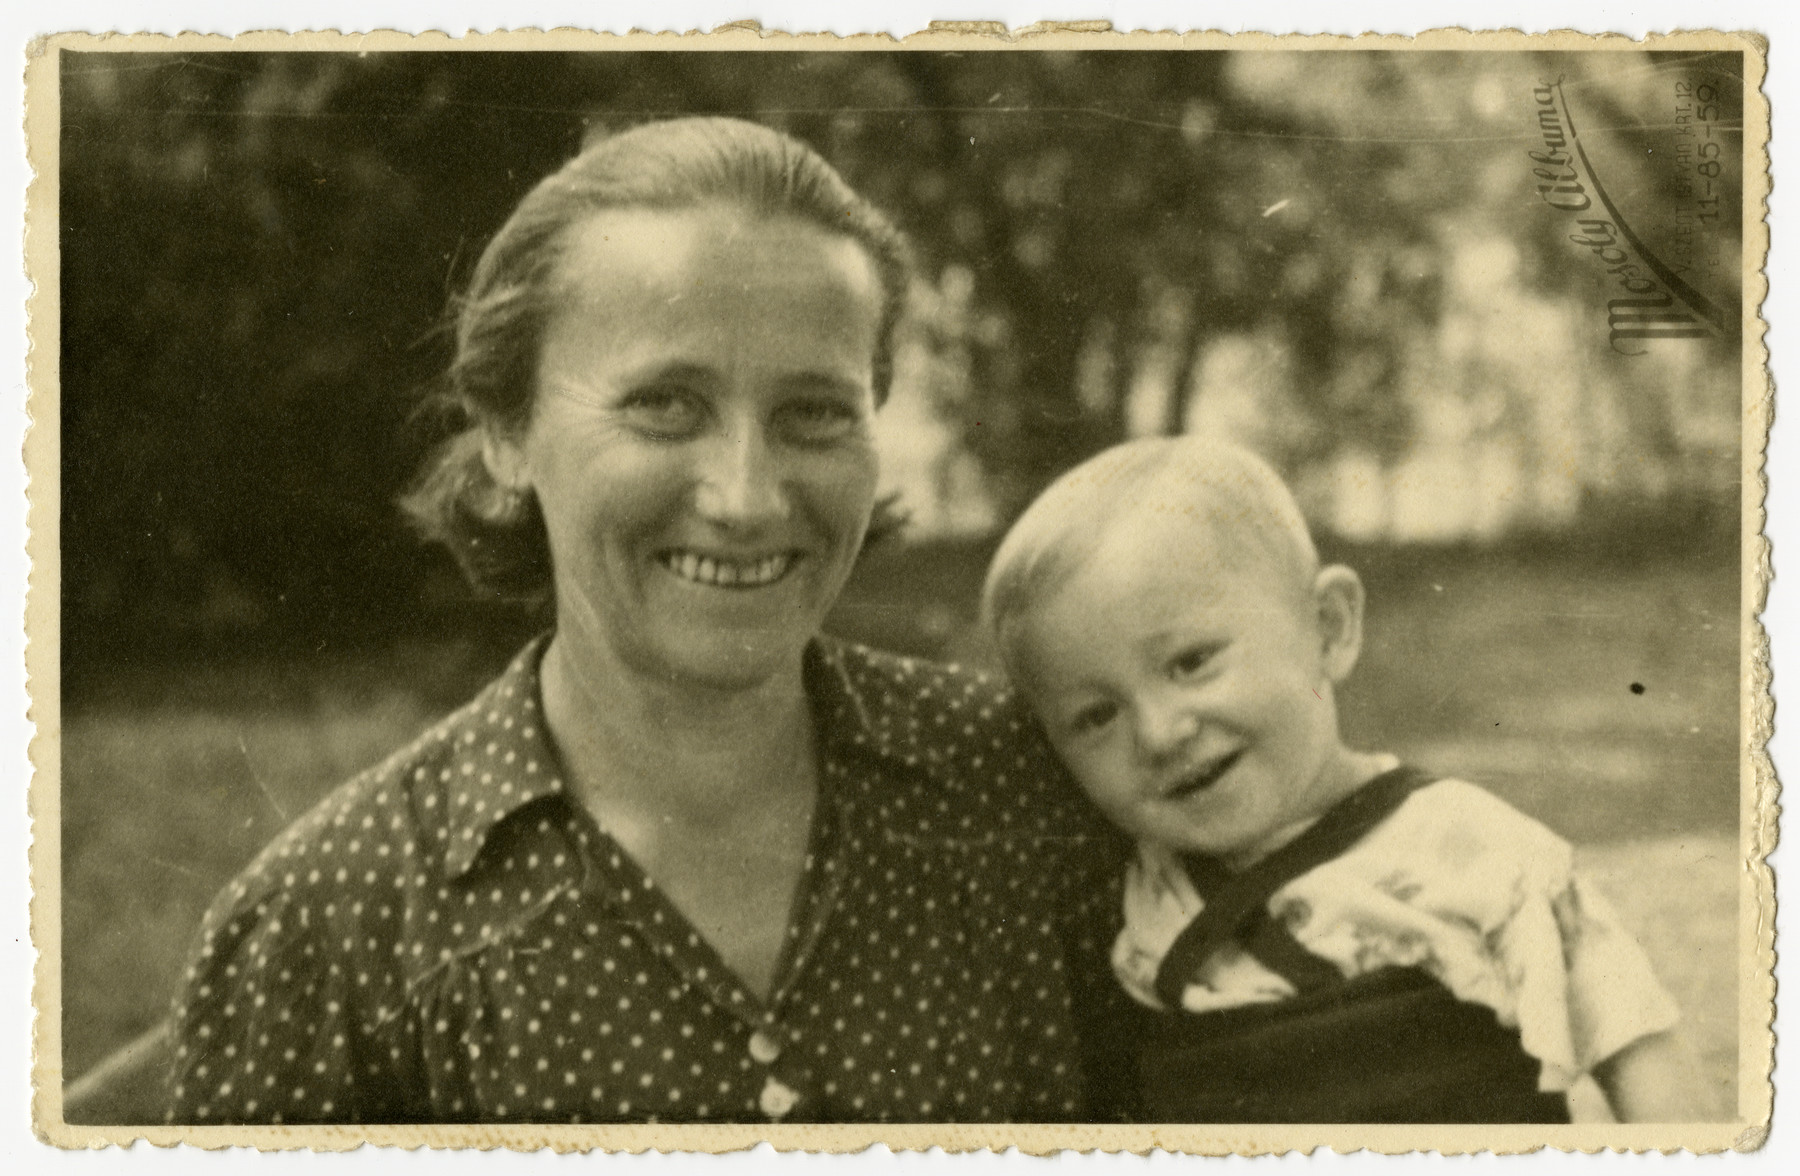 Close-up portrait of a woman and small child.

The original Hungarian caption reads: "As a token of remembrance to the best hearted woman, with real love from Bosza Janos, nee Ilonka Papp."